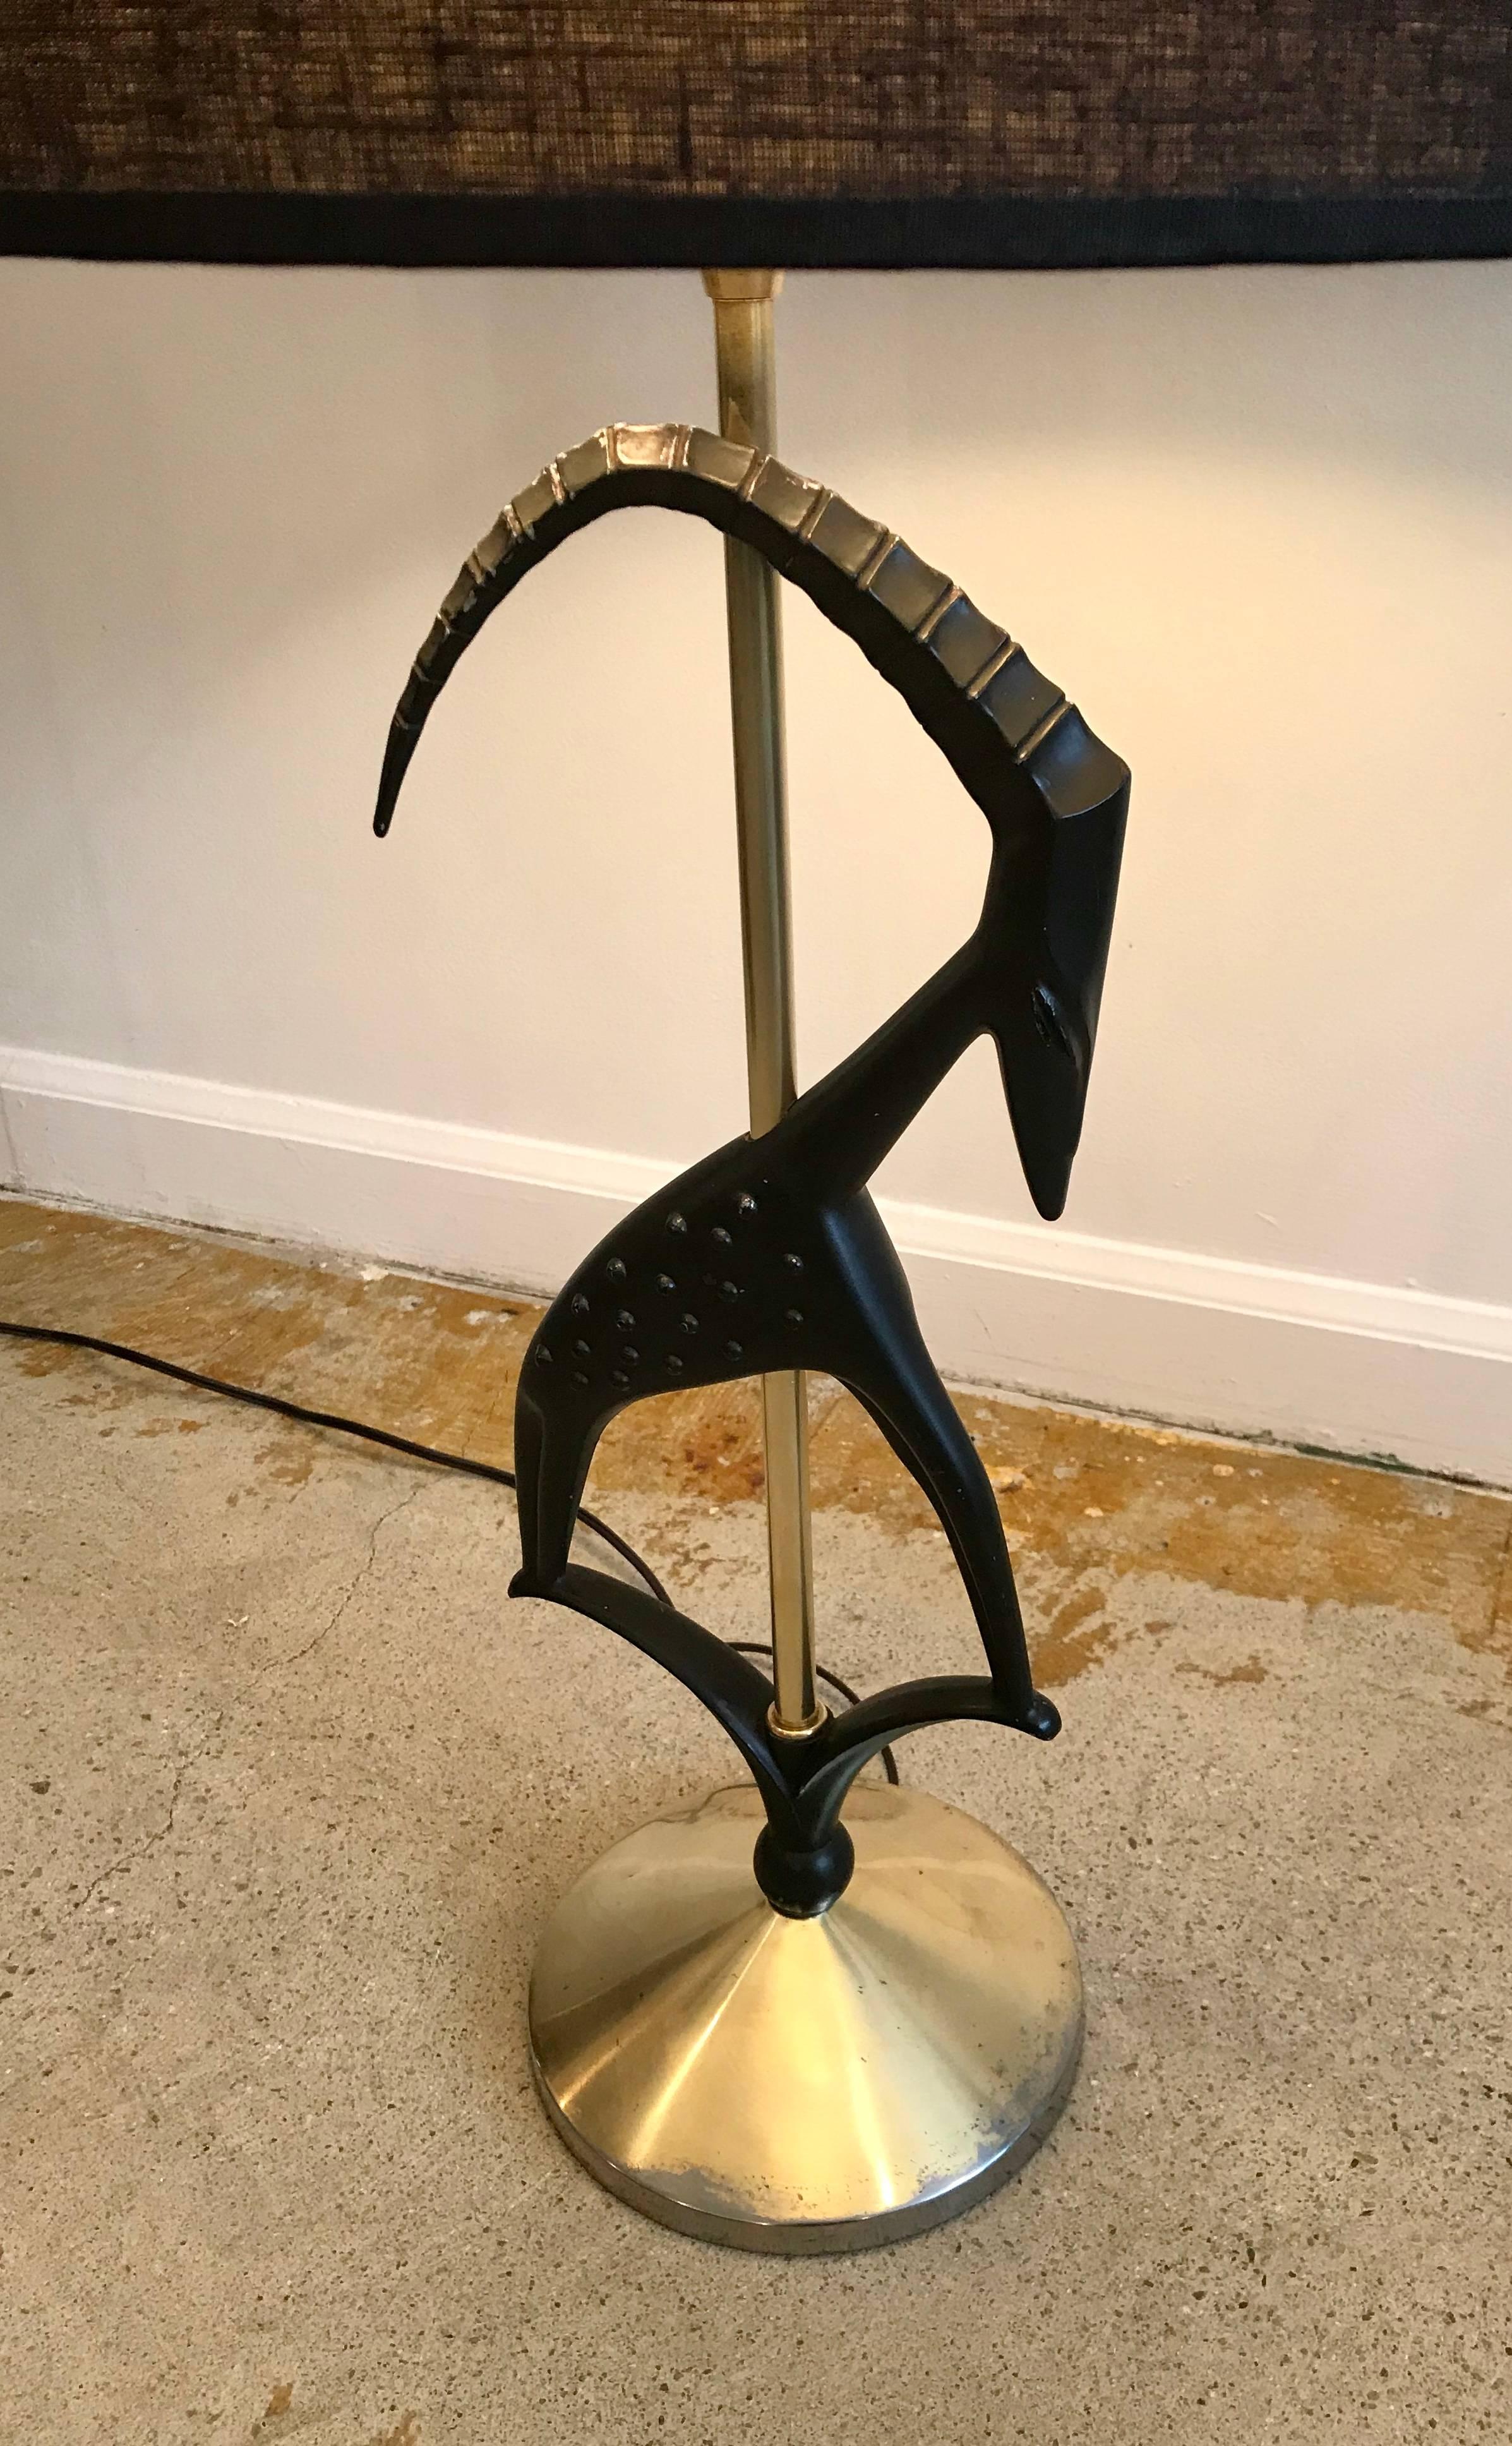 Very cool sculptured Gazelle table lamp by Rembrandt Lamp Co, professionally restored and rewired but maintaining it's original finish and beauty. Cloth shade not included.